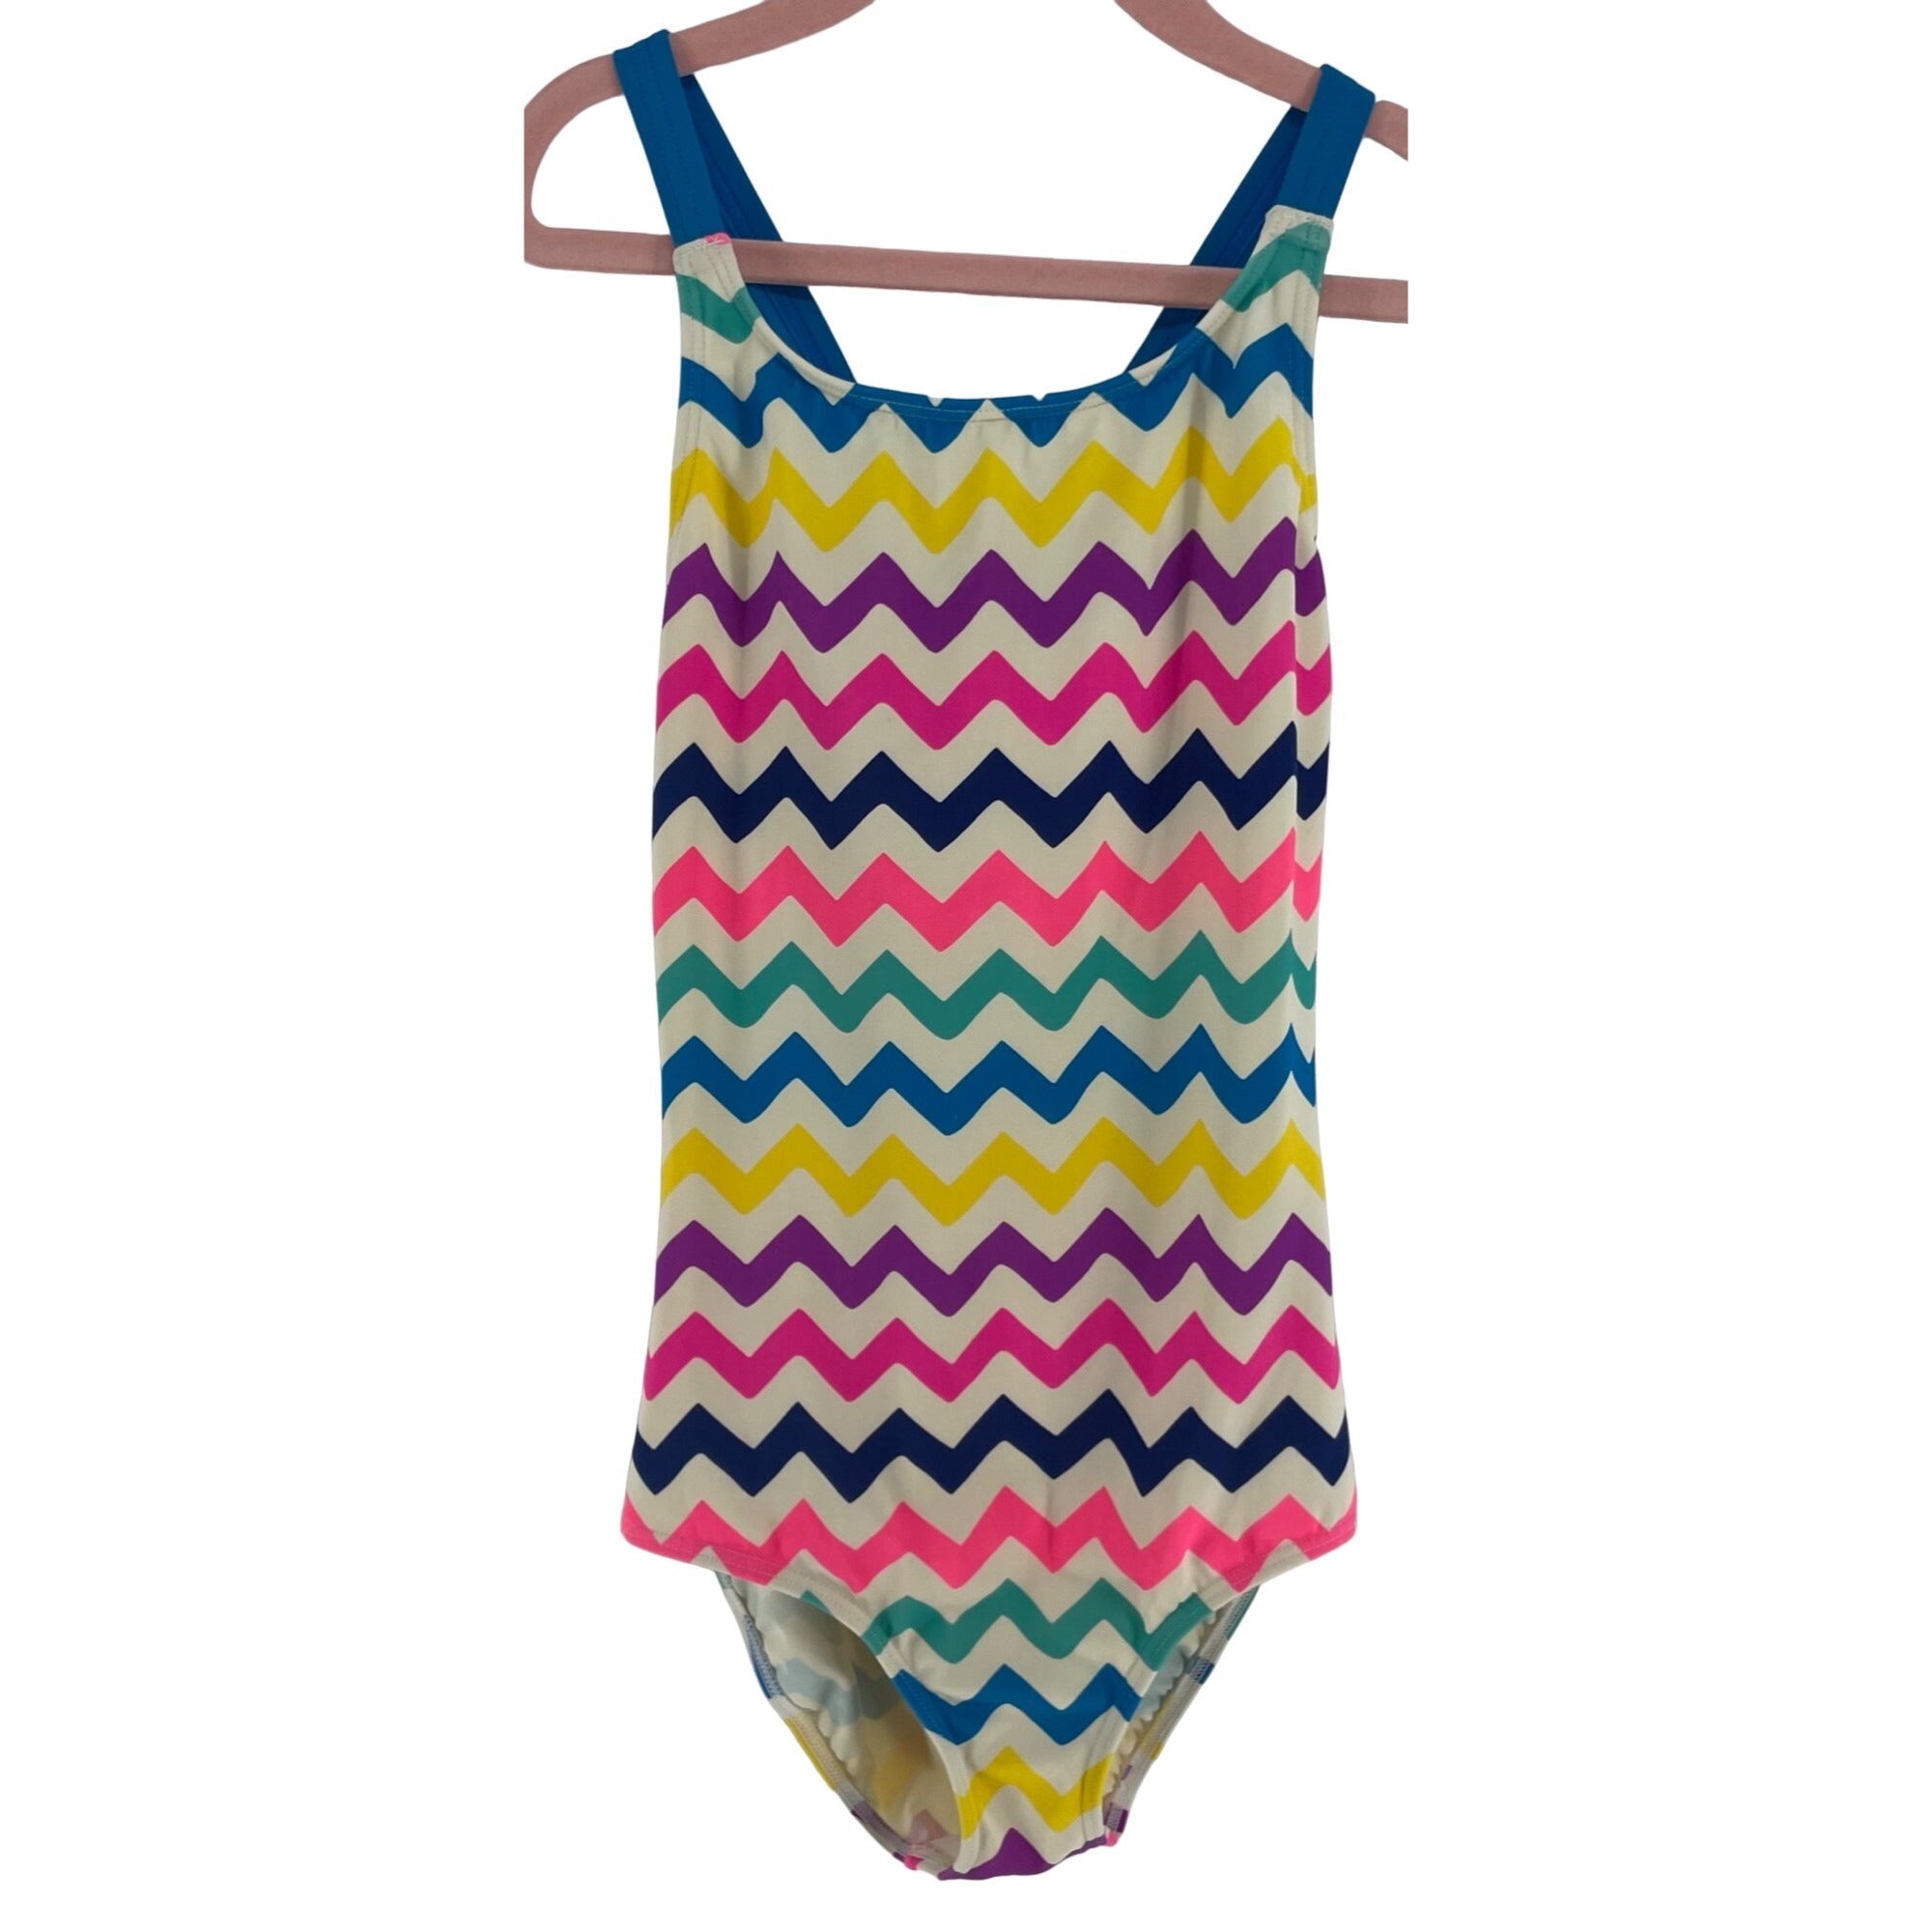 Boden Girl's Size 9-10 Years Multi-Colored Zig-Zag Striped Swimsuit